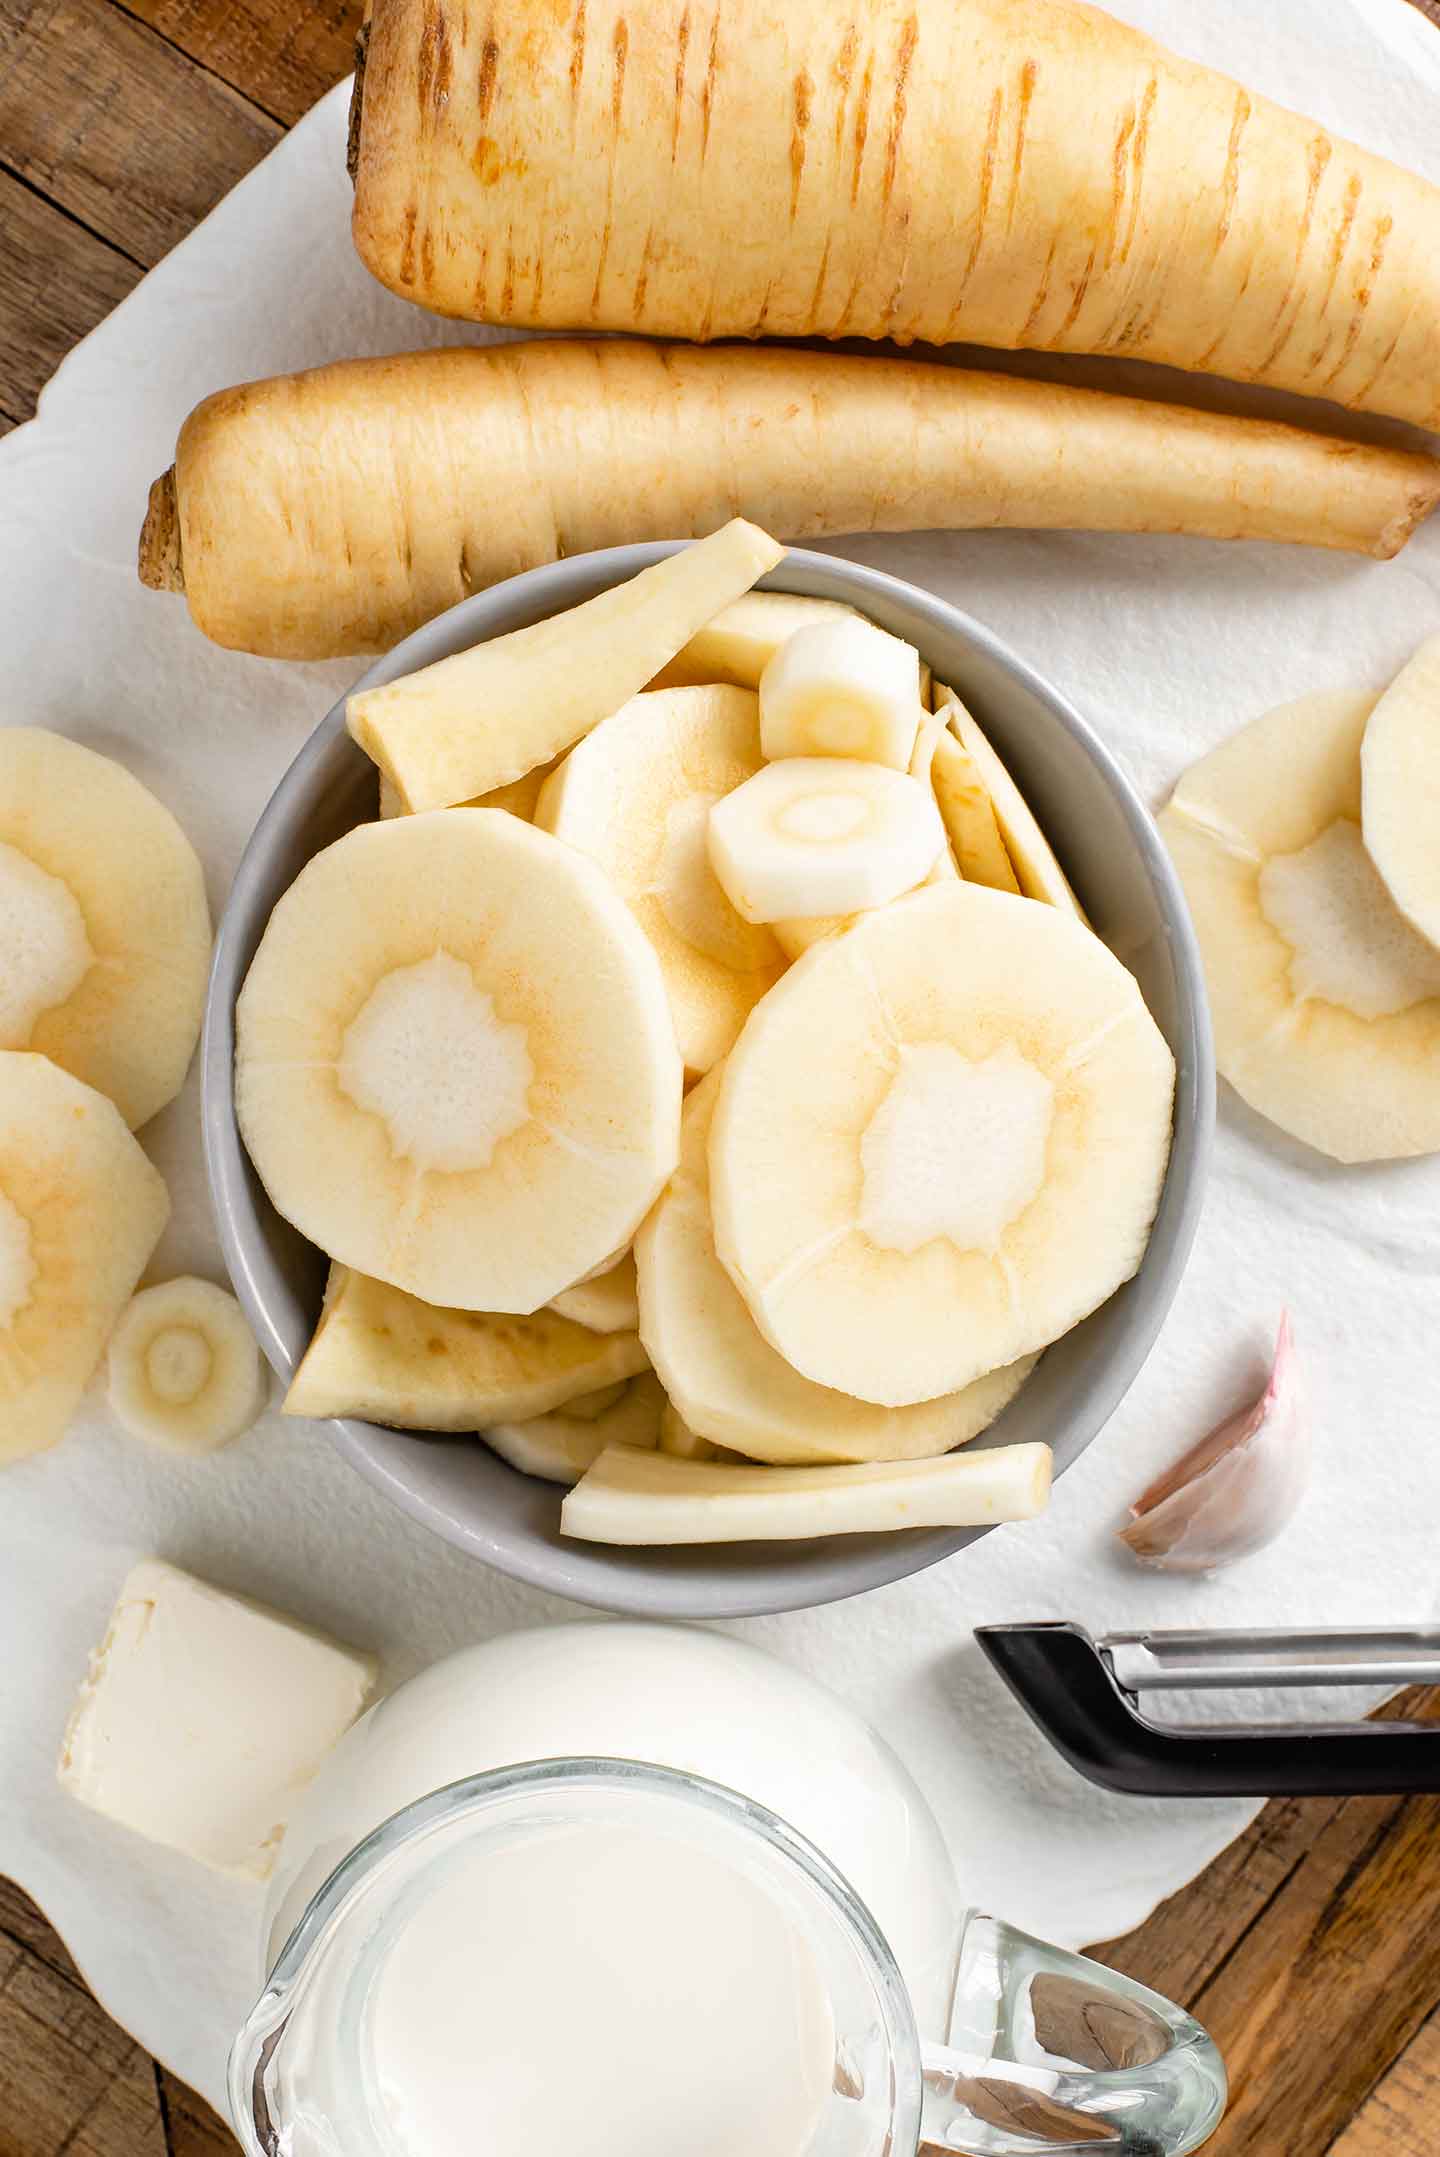 Top down view of ingredients for parsnip puree. Peeled and sliced parsnips are piled in a small bowl with garlic, butter, and milk surrounding.